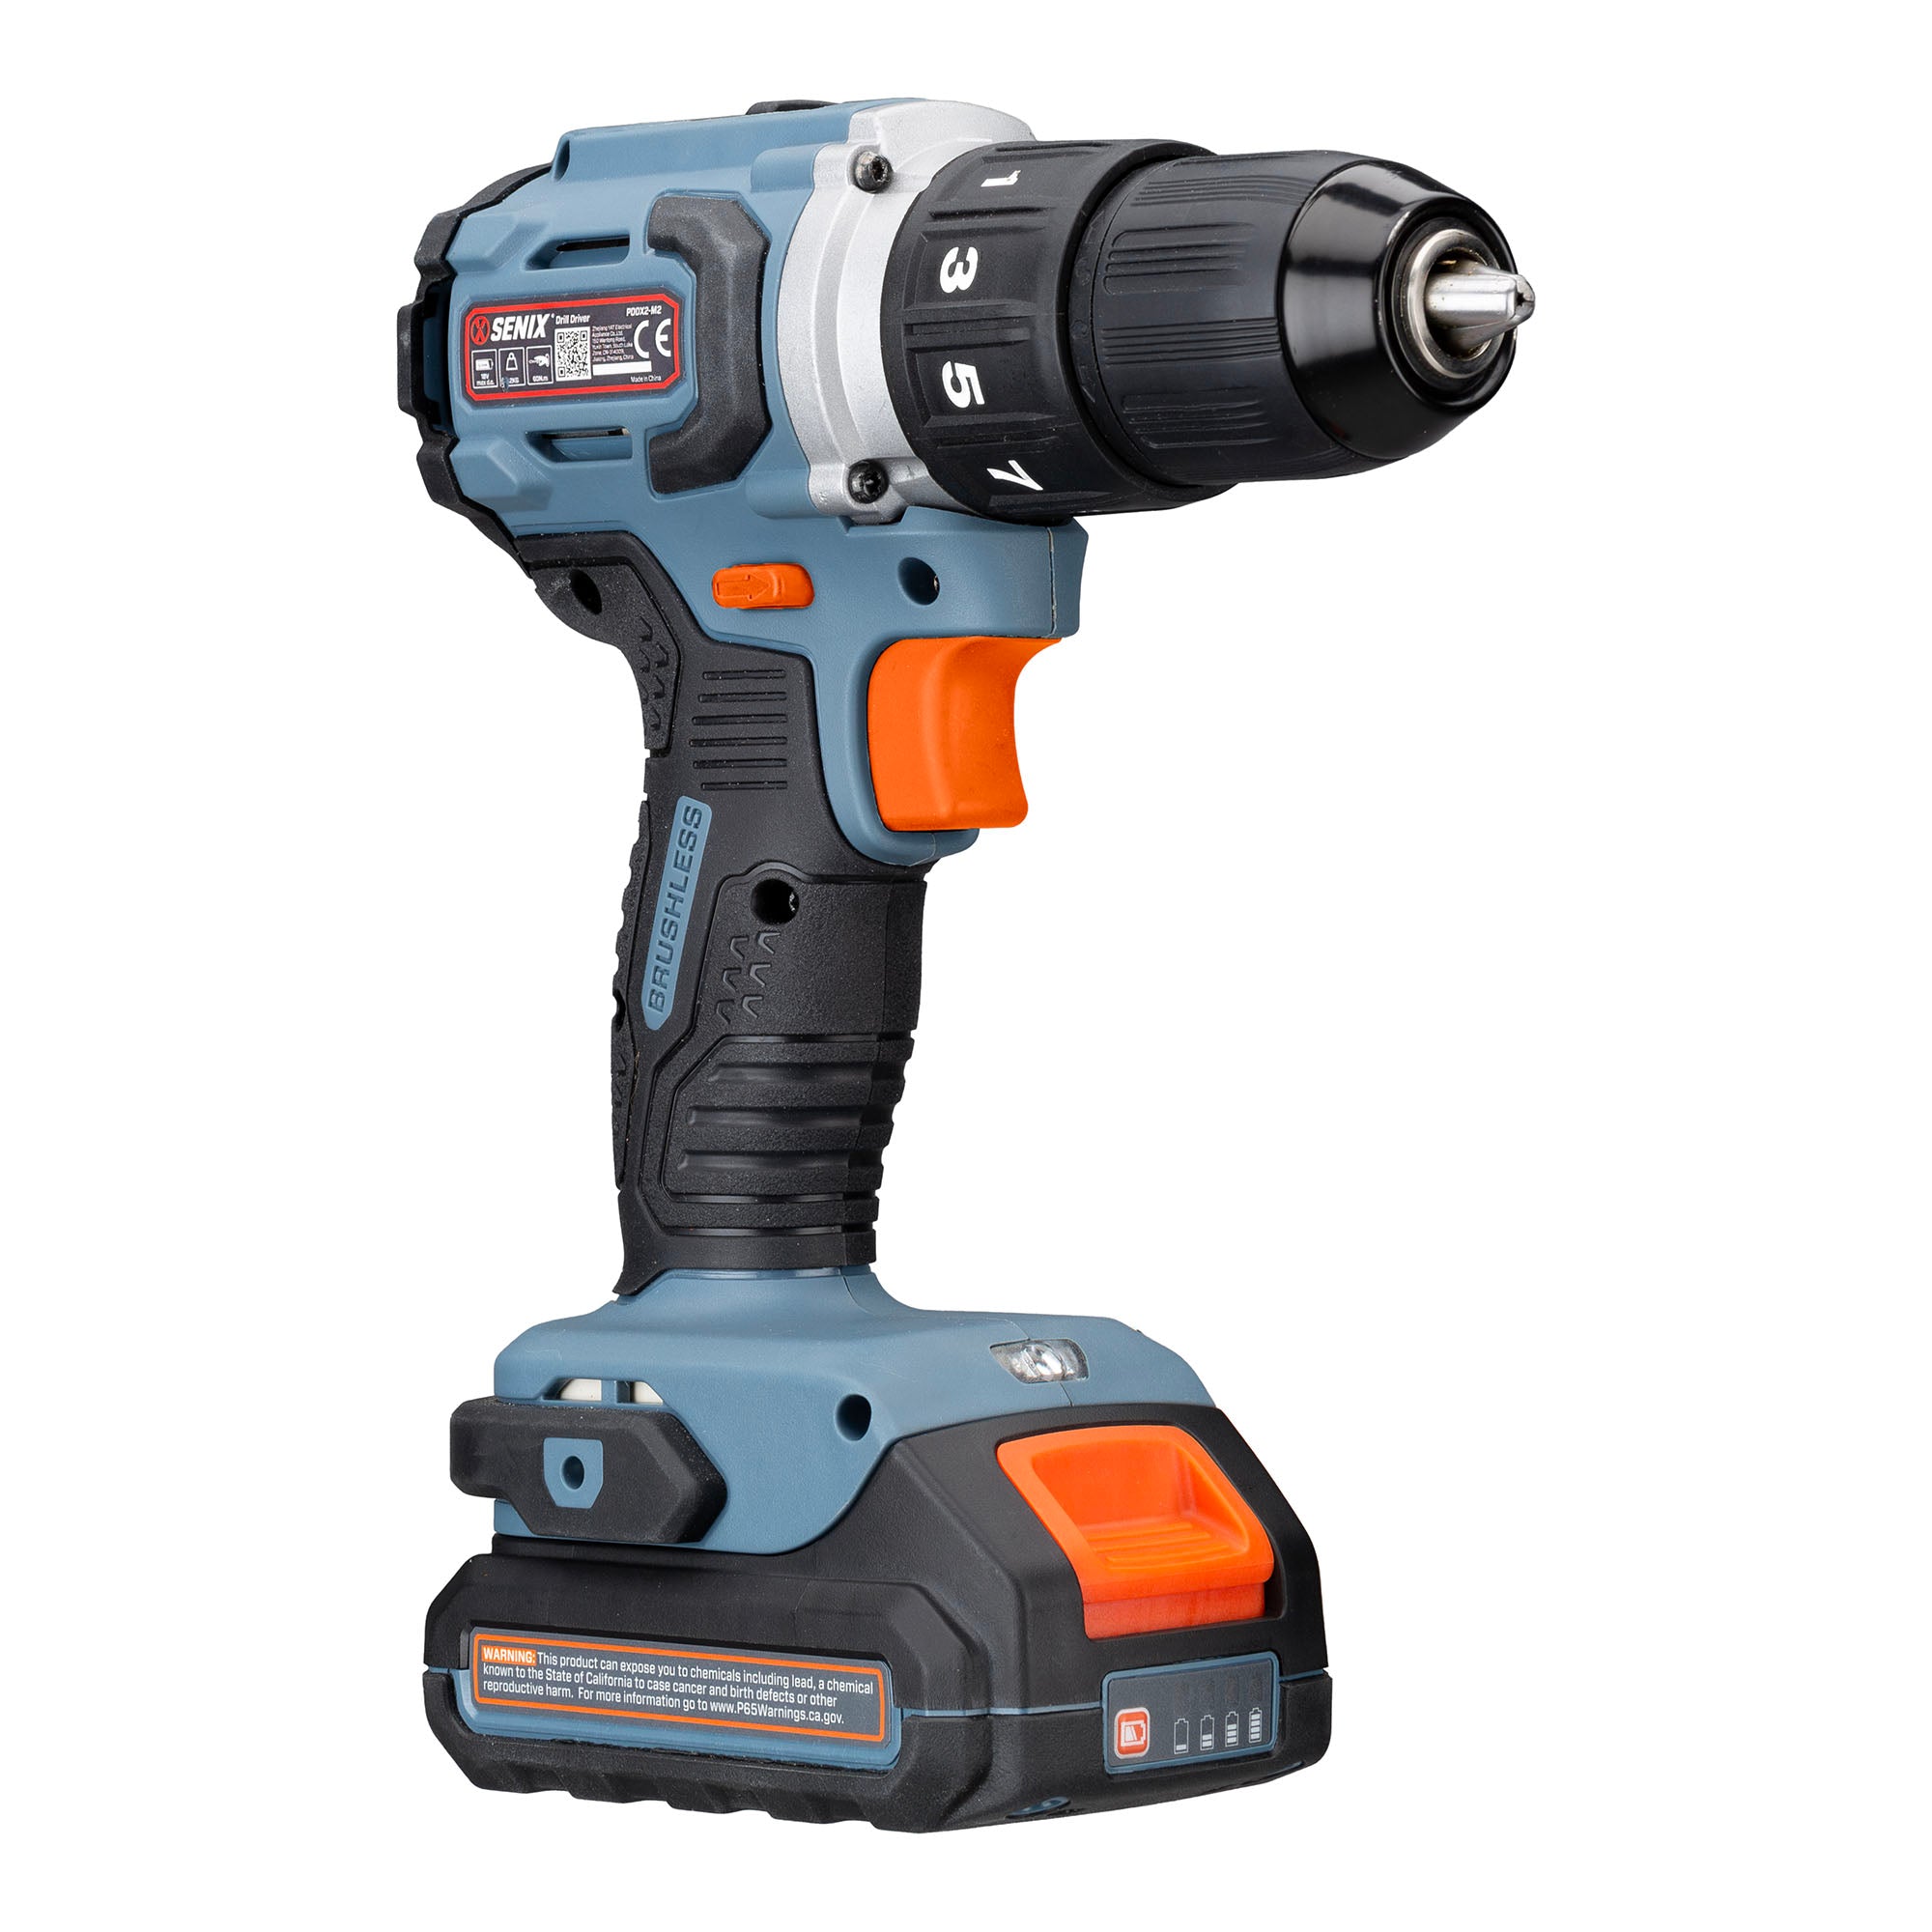 20V MAX* Brushless Cordless Drill/Driver and Impact Driver Combo